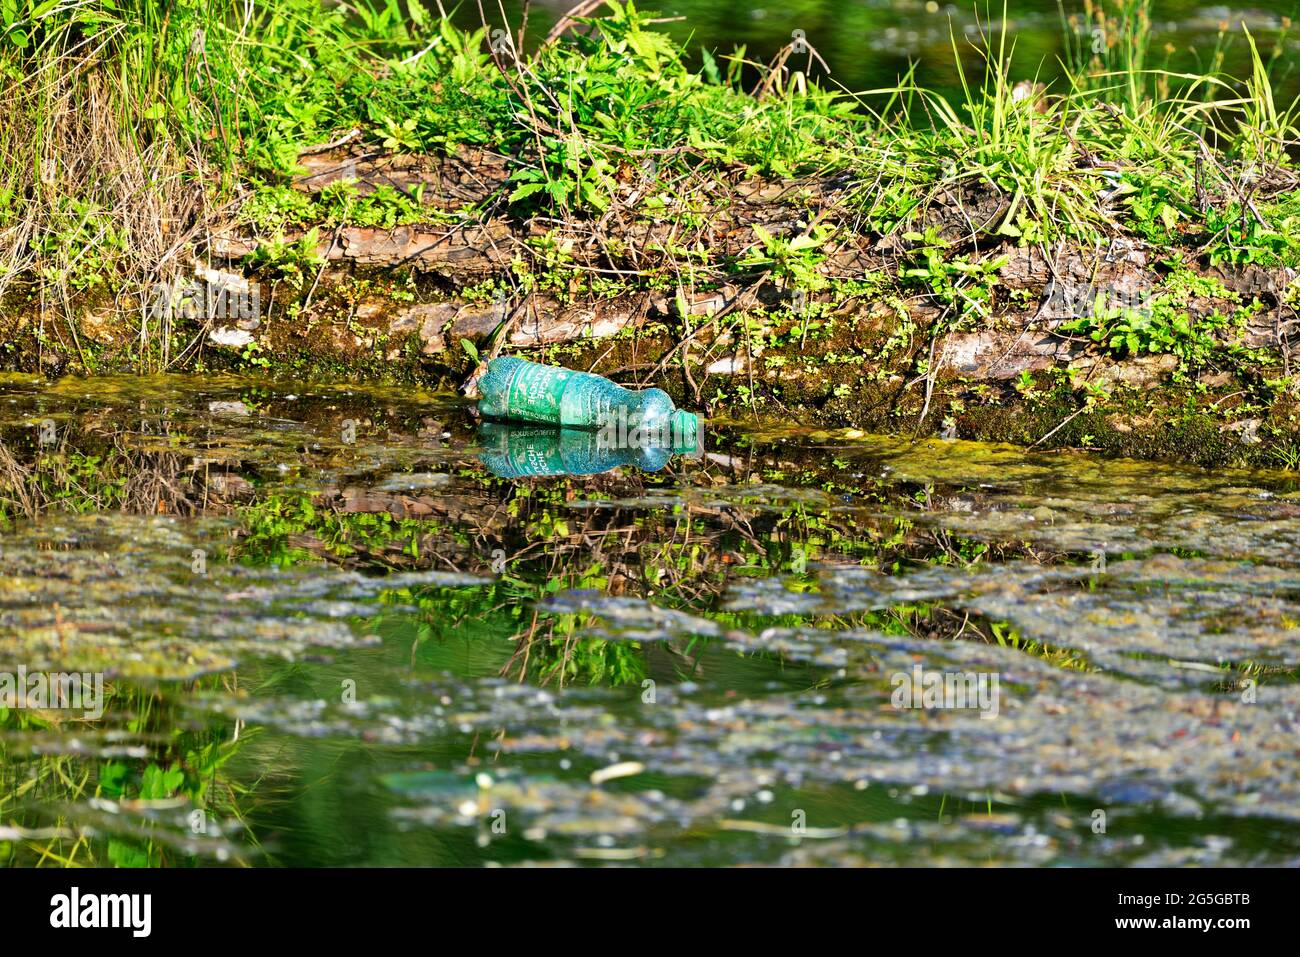 Discarded plastic bottle in a pond Stock Photo